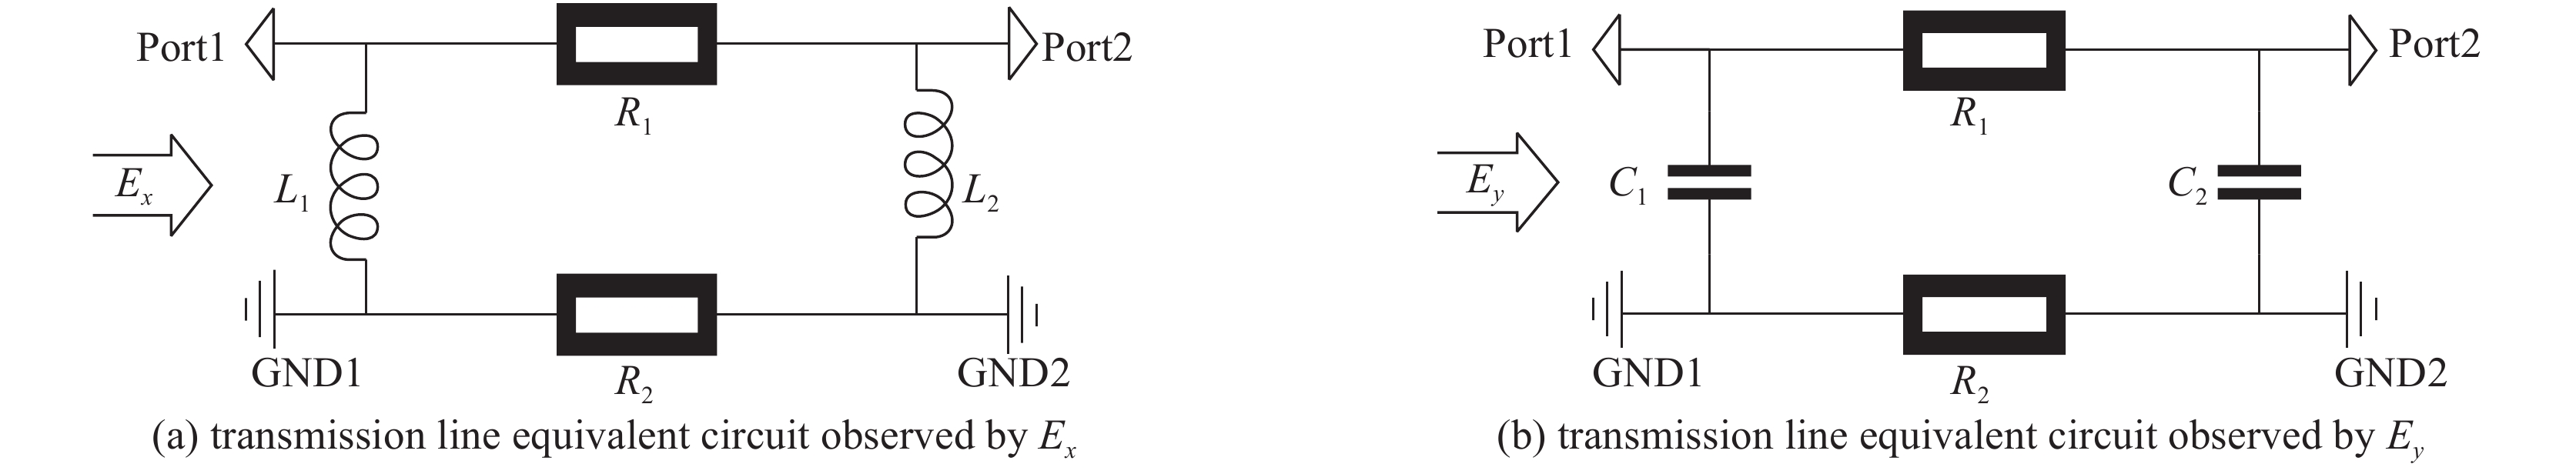 Transmission line equivalent circuit for the meander line polarizer observed by Ex and Ey